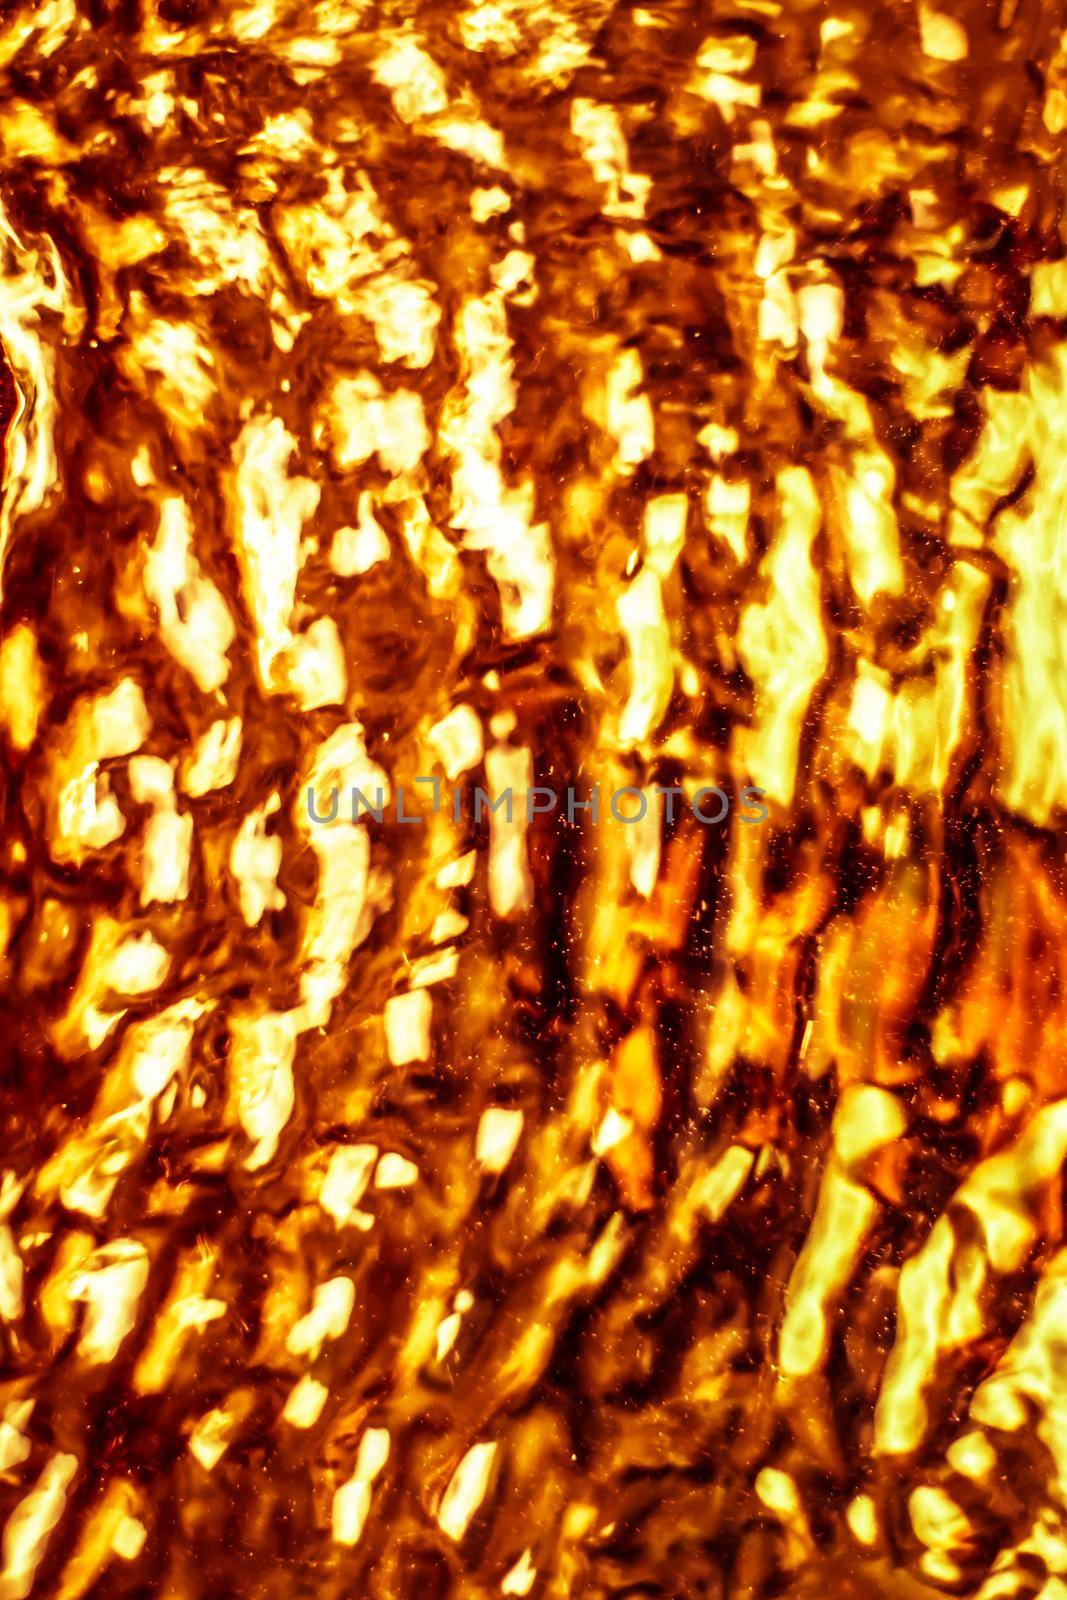 abstract golden metallic background - textures and design elements styled concept